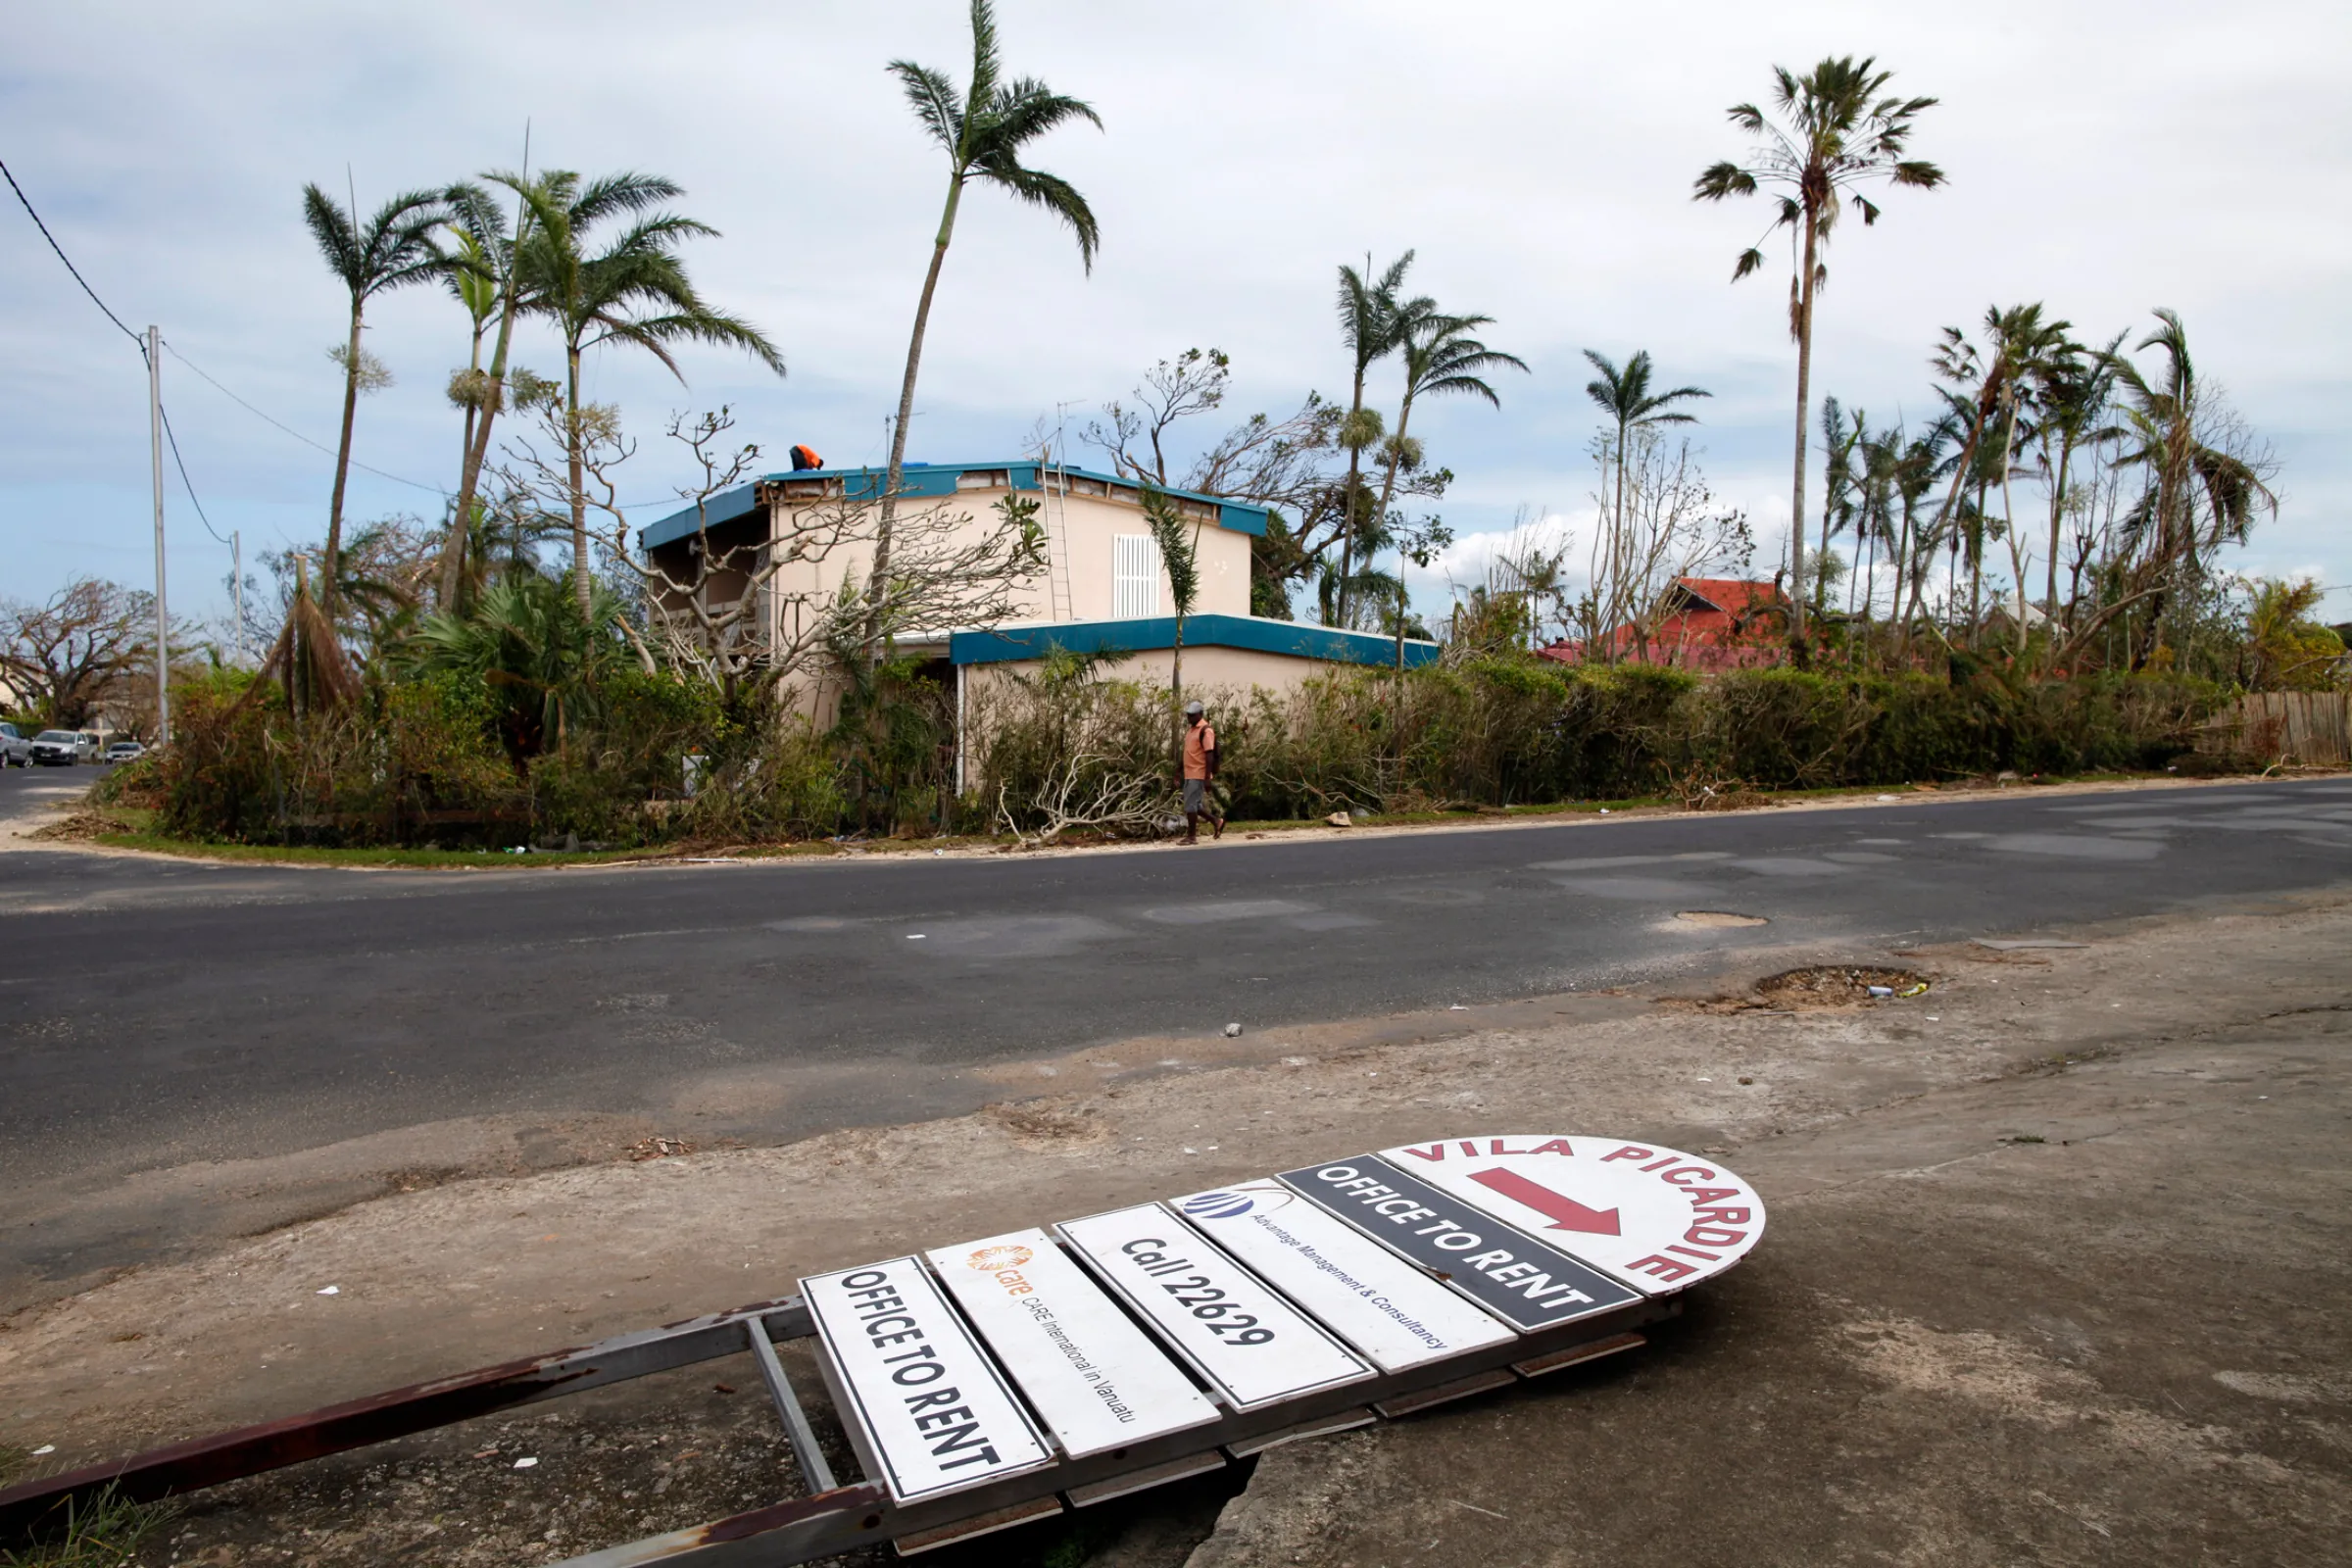 A man passes trees and a fallen shop sign, days after Cyclone Pam in Port Vila